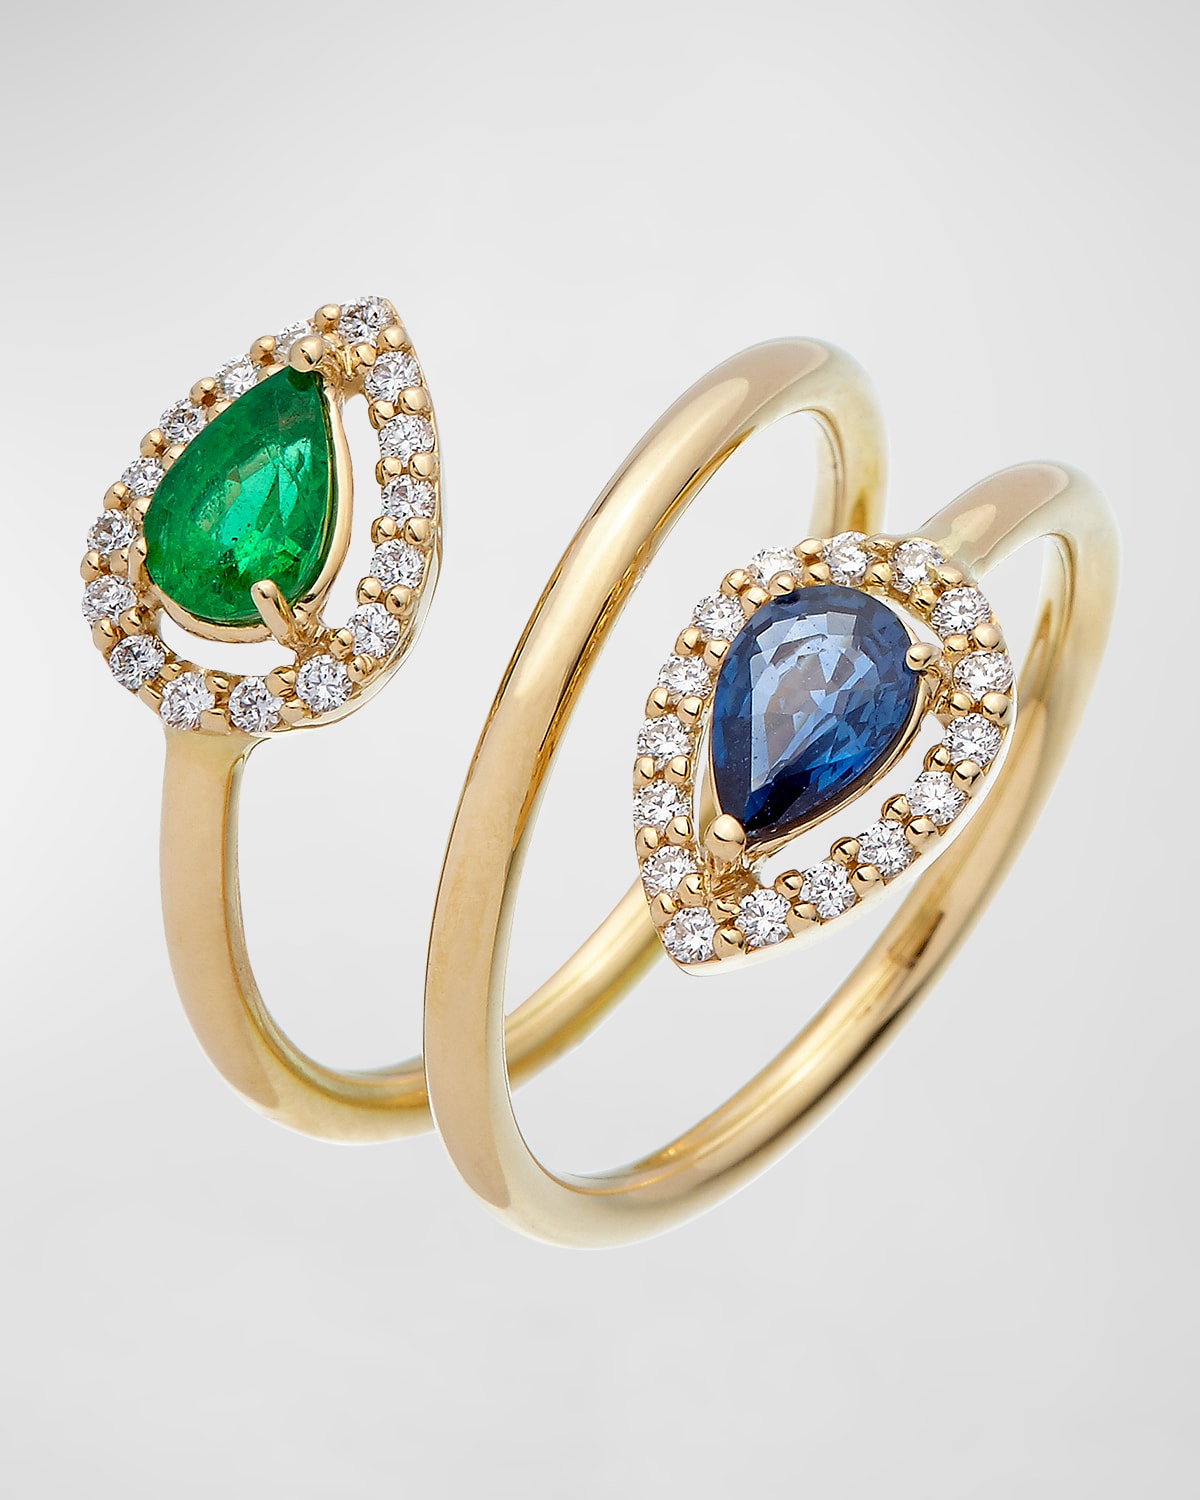 18K Yellow Gold Ring with Emerald, Sapphire and Diamonds